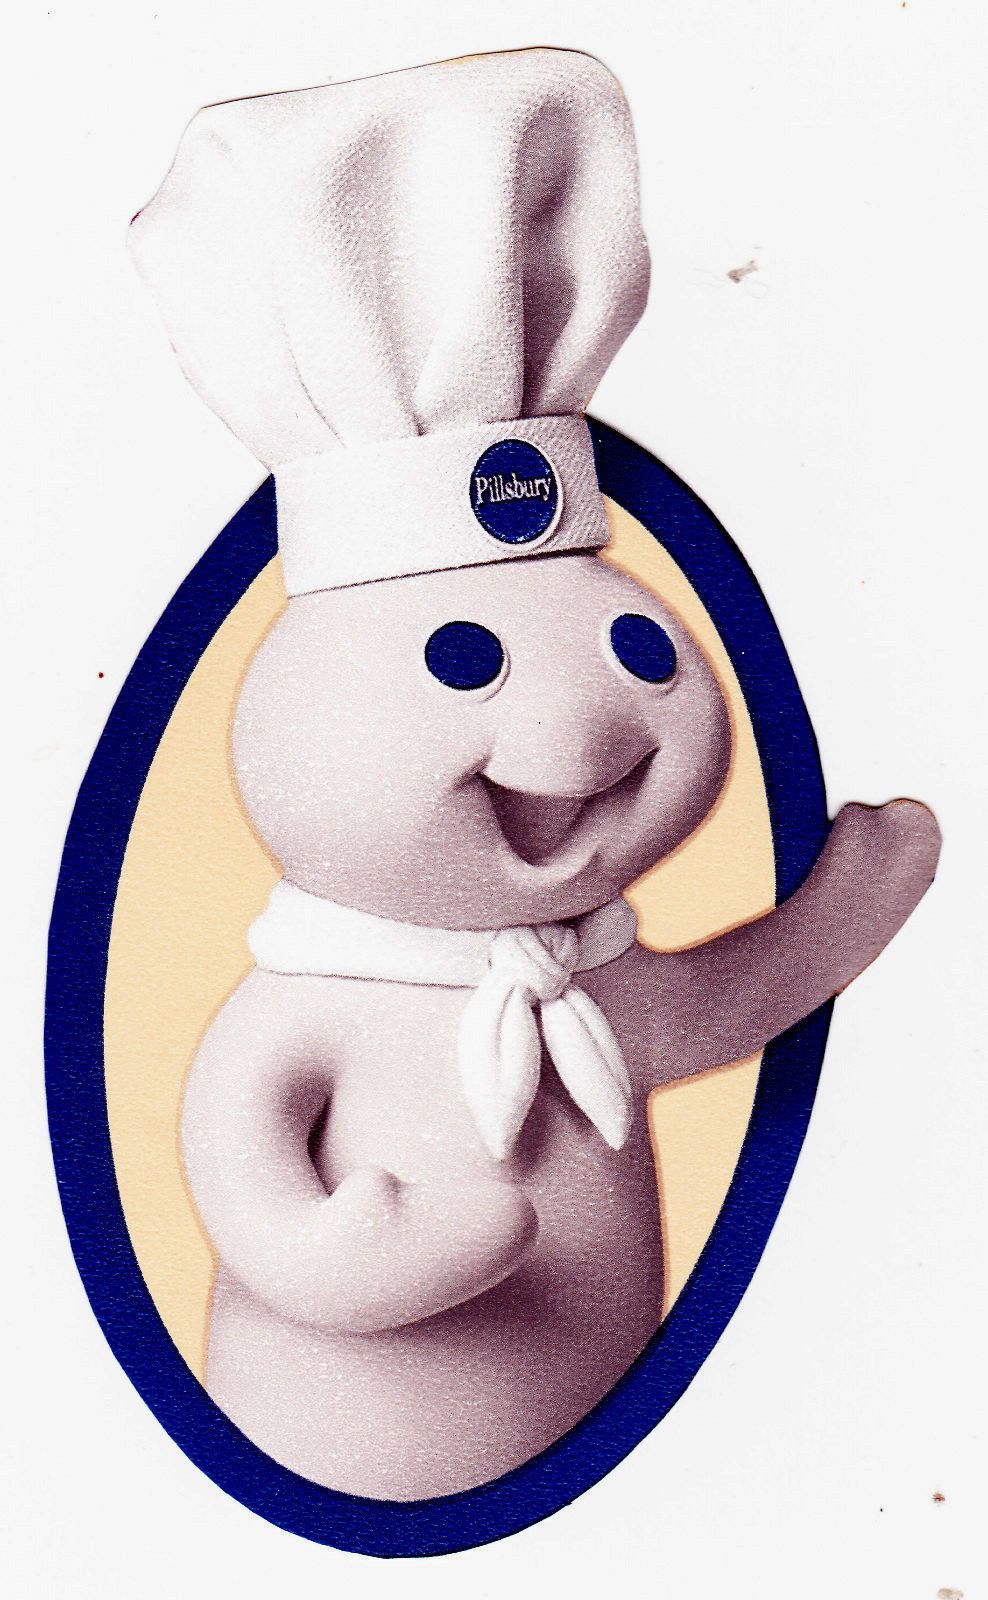 Free download PILLSBURY DOUGHBOY KITCHEN CHARACTER PREPASTED